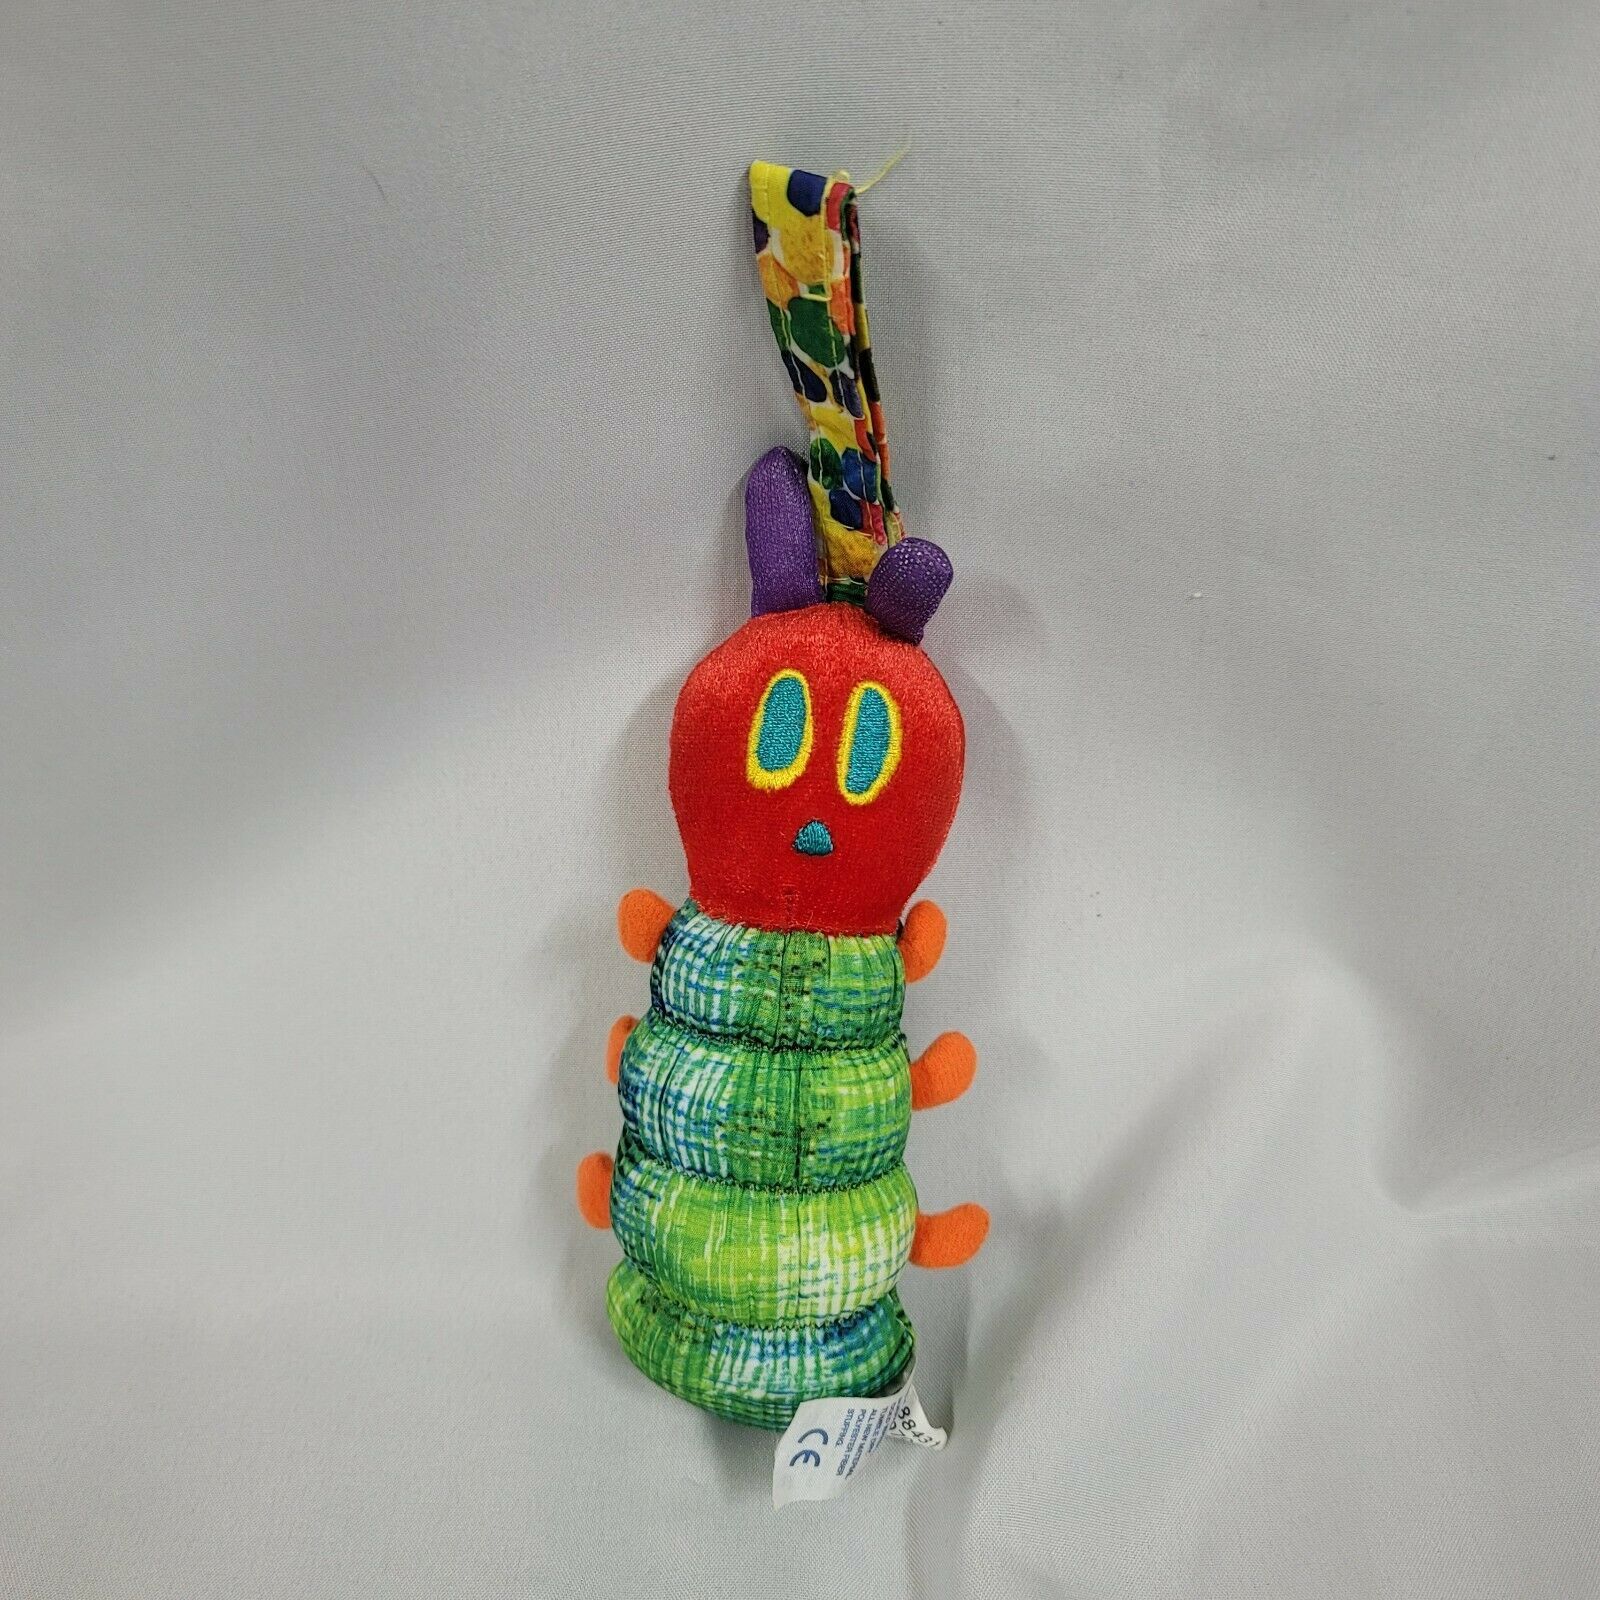 Kids Preferred The Hungry Caterpillar Eric Carle 2008 Baby Rattle Chime Toy - $19.79